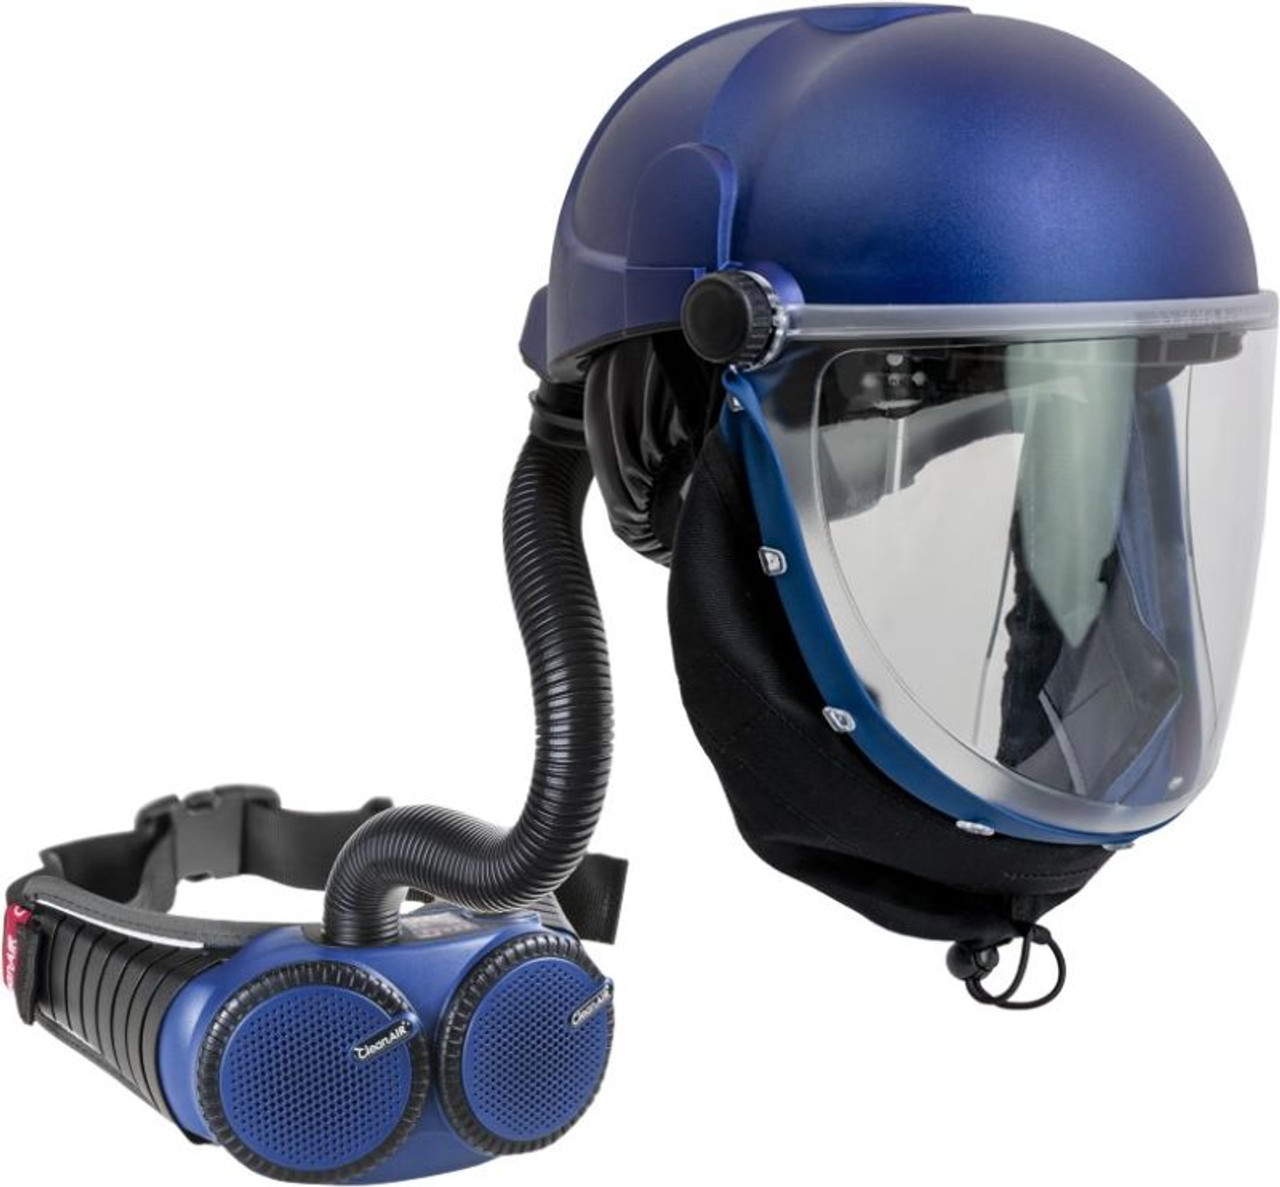 Cleanair Helmet With Clear Flip-Up Visor & Papr Unit - Pre-Packaged Kit  Includes Cleanair Helmt, Rpa530 Aergo Unit, Li-Ion Battery, Recharger, Flex Hose And Fittings, Comfort Belt, Flow Indicator